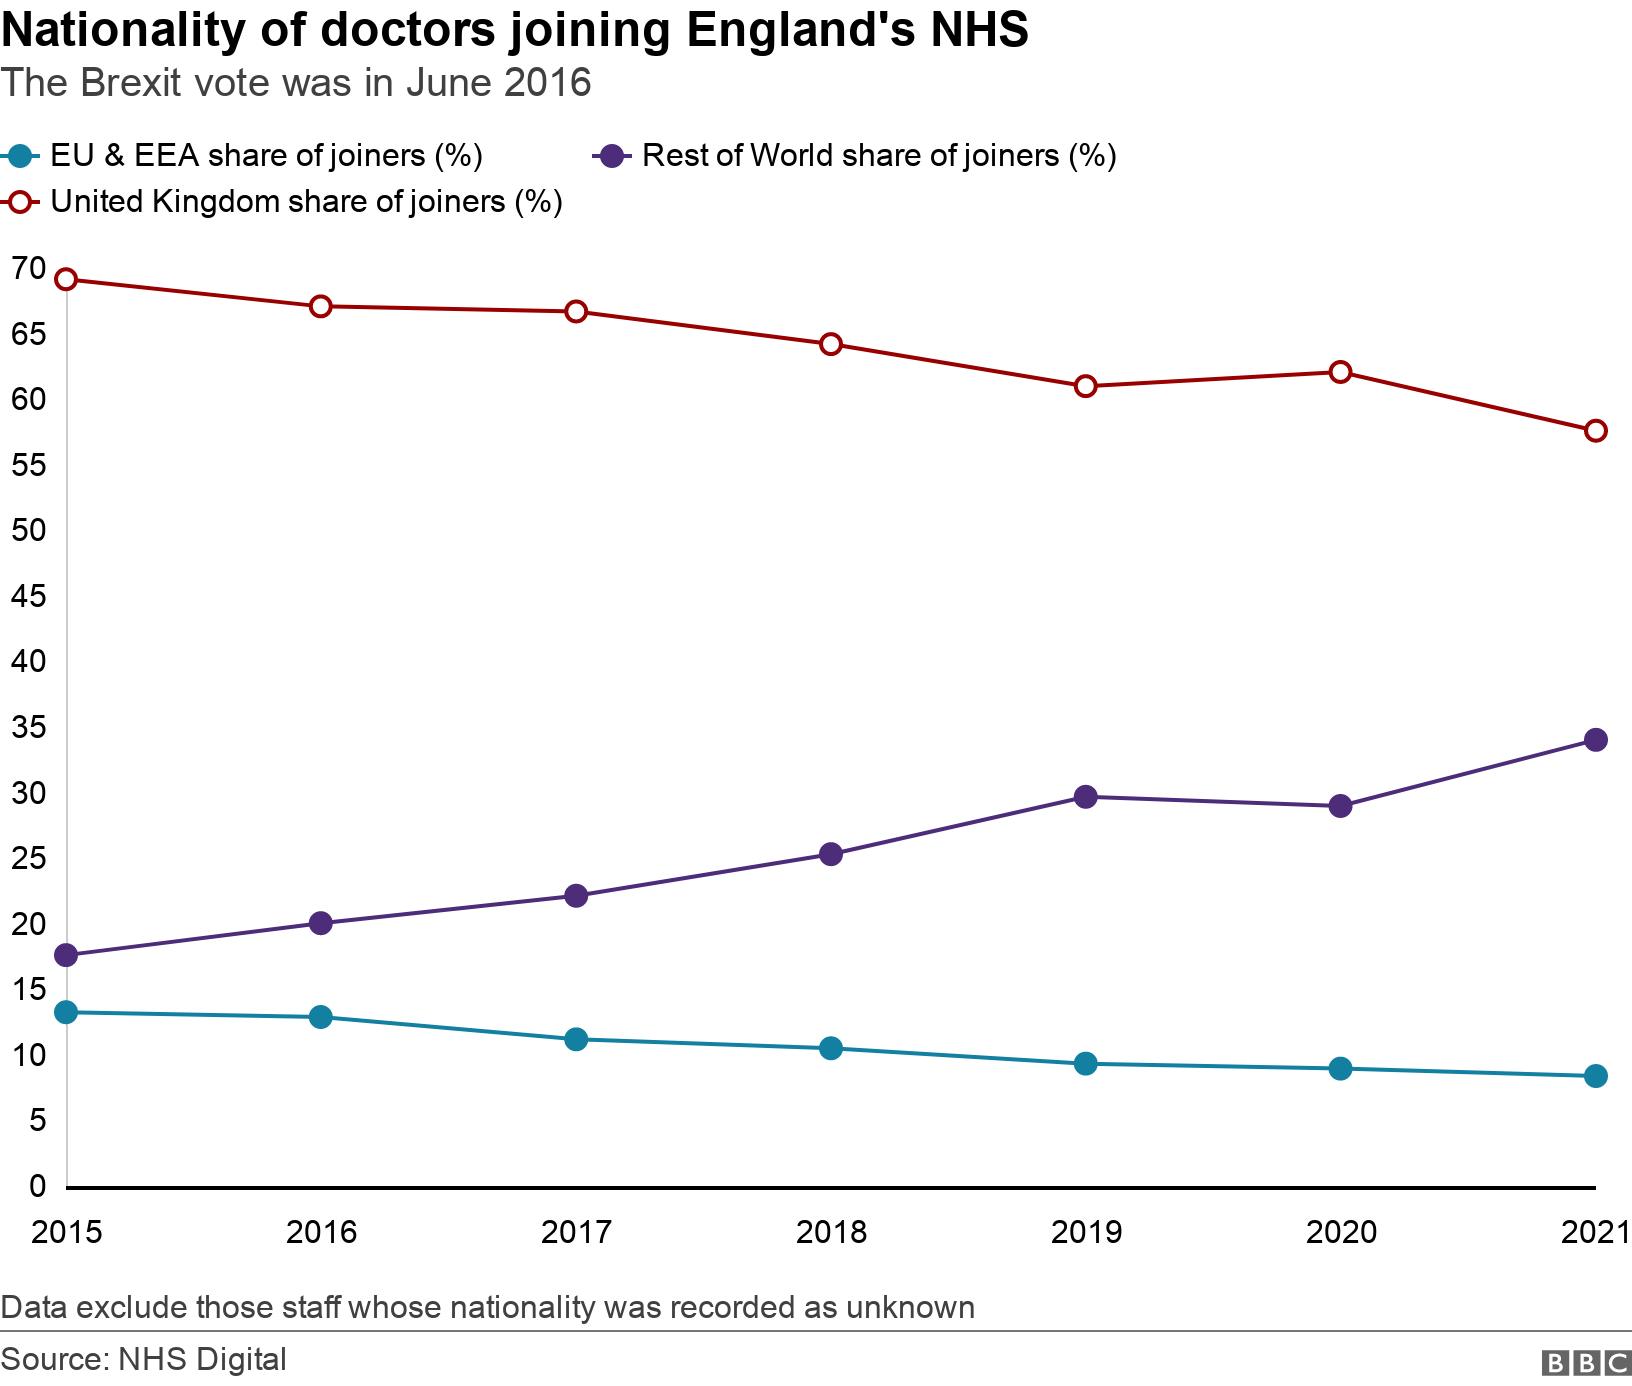 Nationality Of Doctors Joining England'S Nhs. The Brexit Vote Was In June 2016. A Line Chart Showing A Breakdown Of Doctors By Nationality Joining The Nhs In England In The Calendar Years 2015-21 Data Exclude Those Staff Whose Nationality Was Recorded As Unknown.